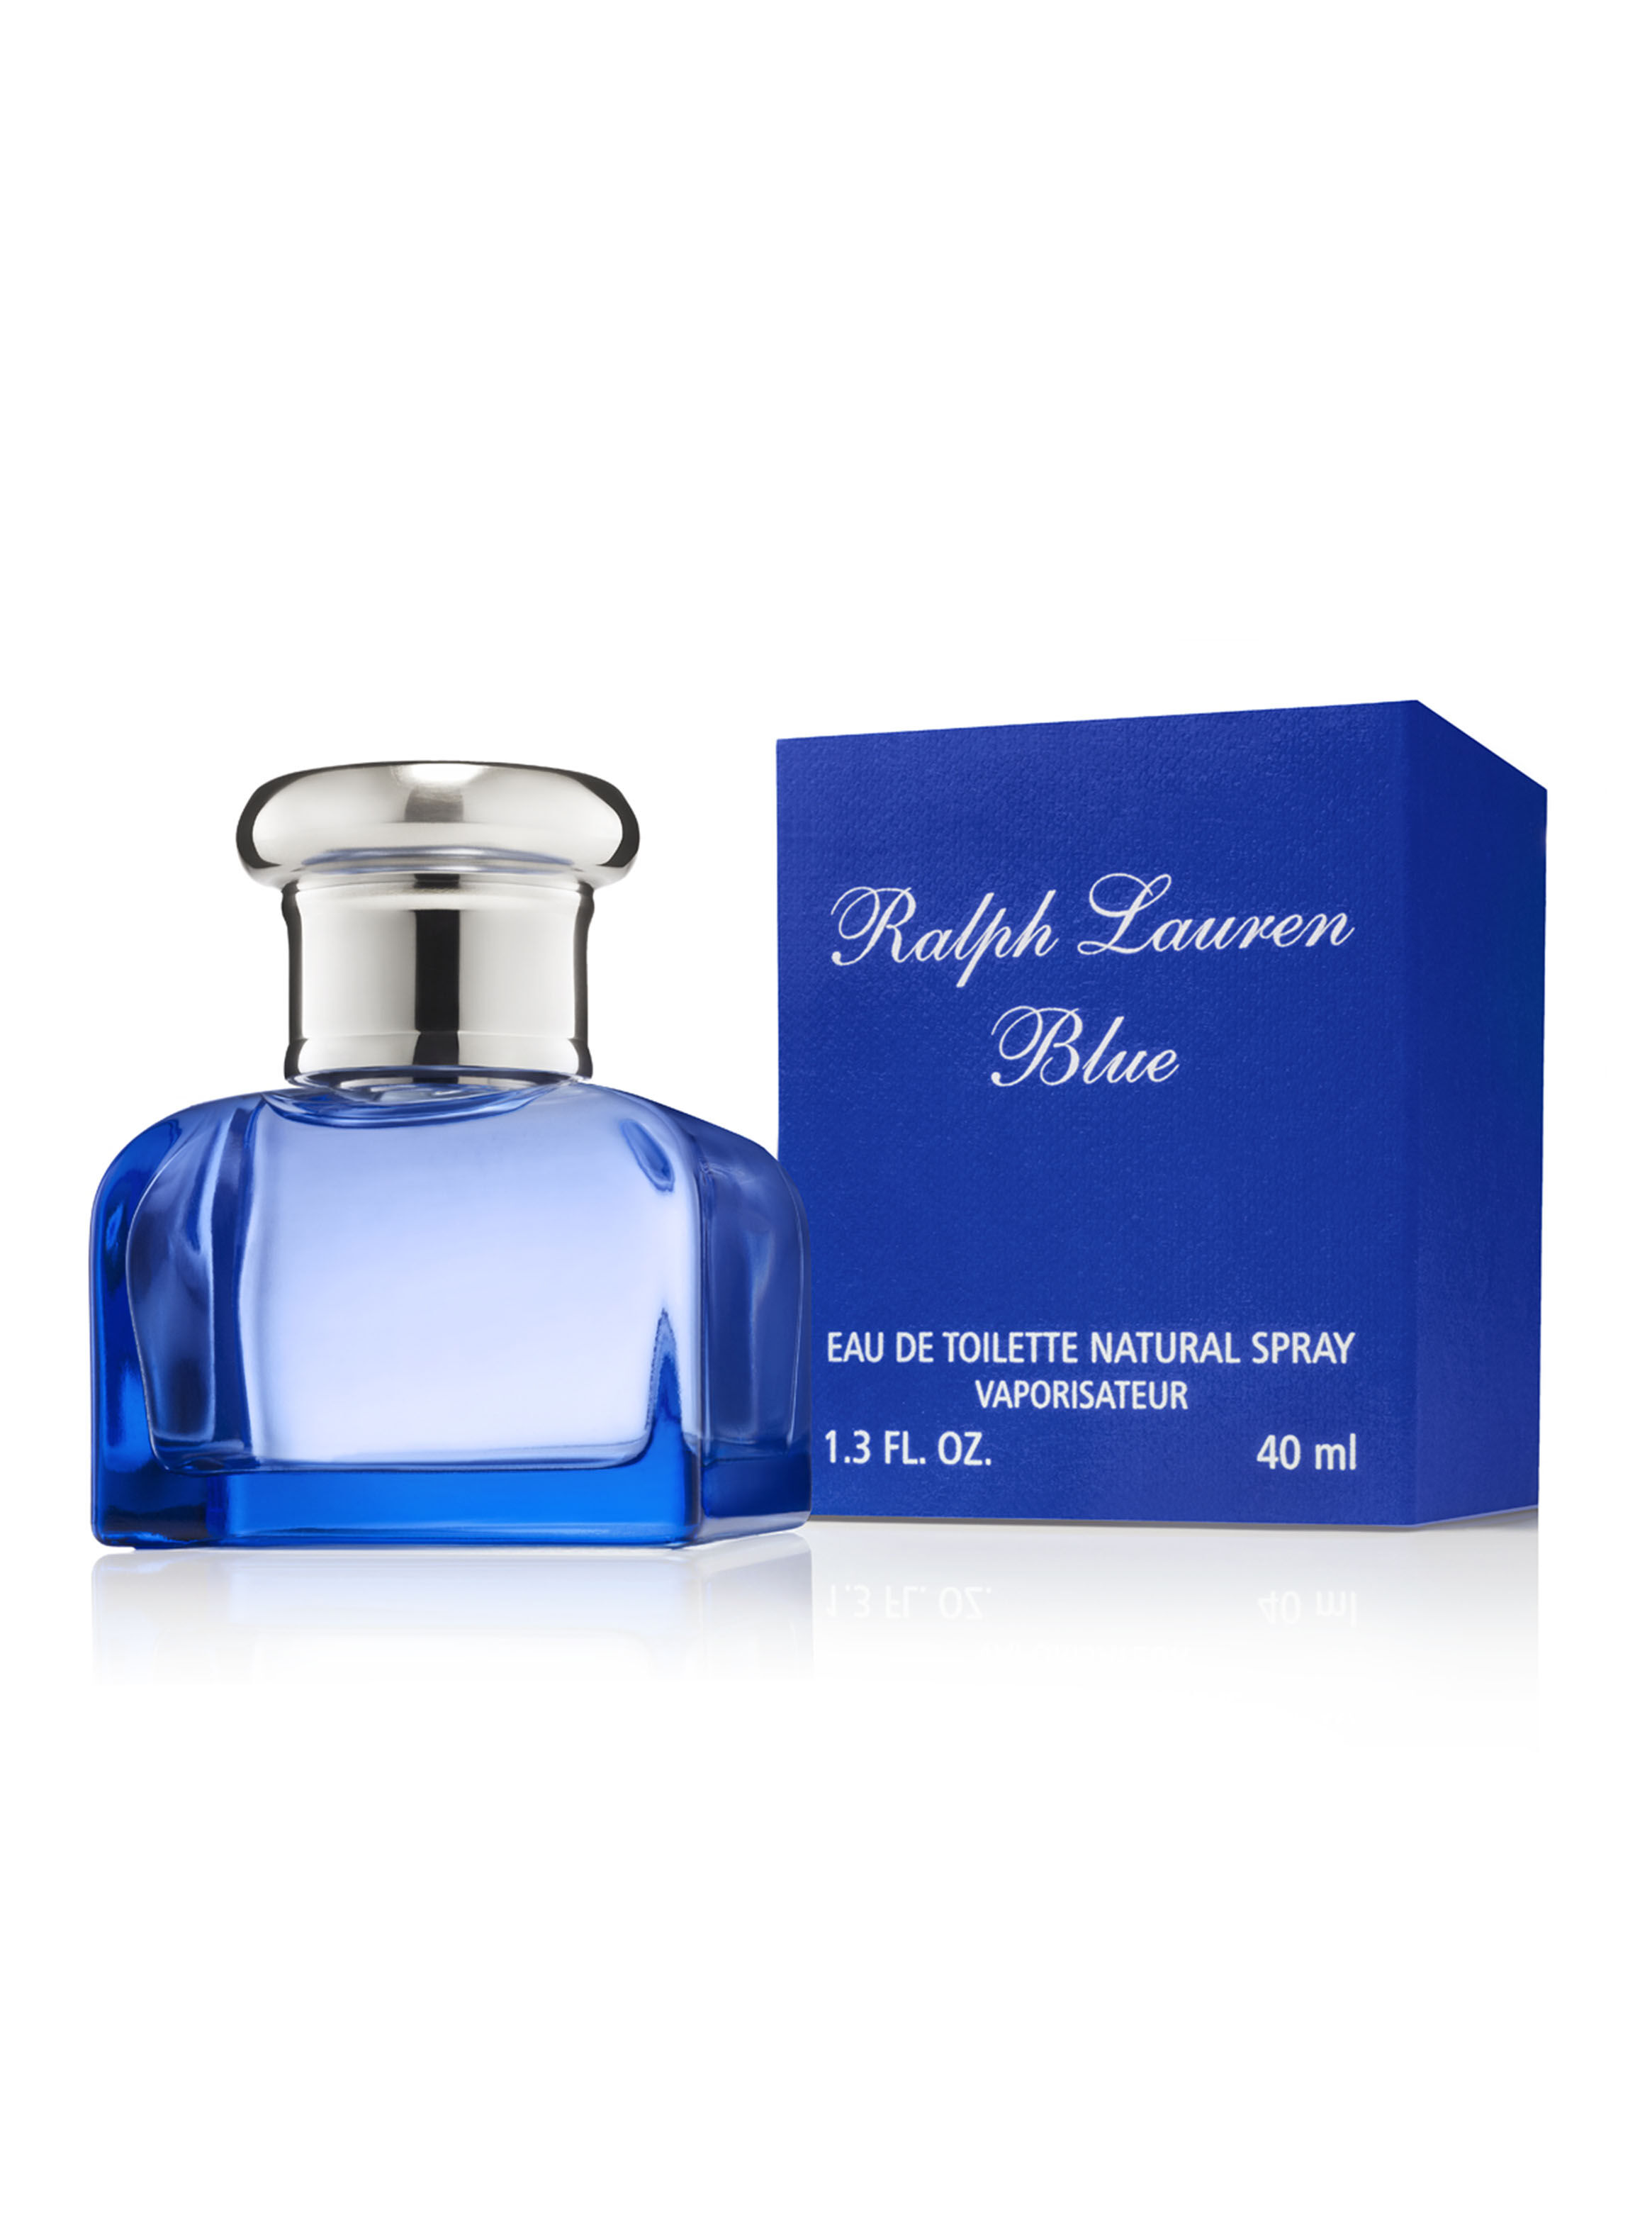 polo blue mujer